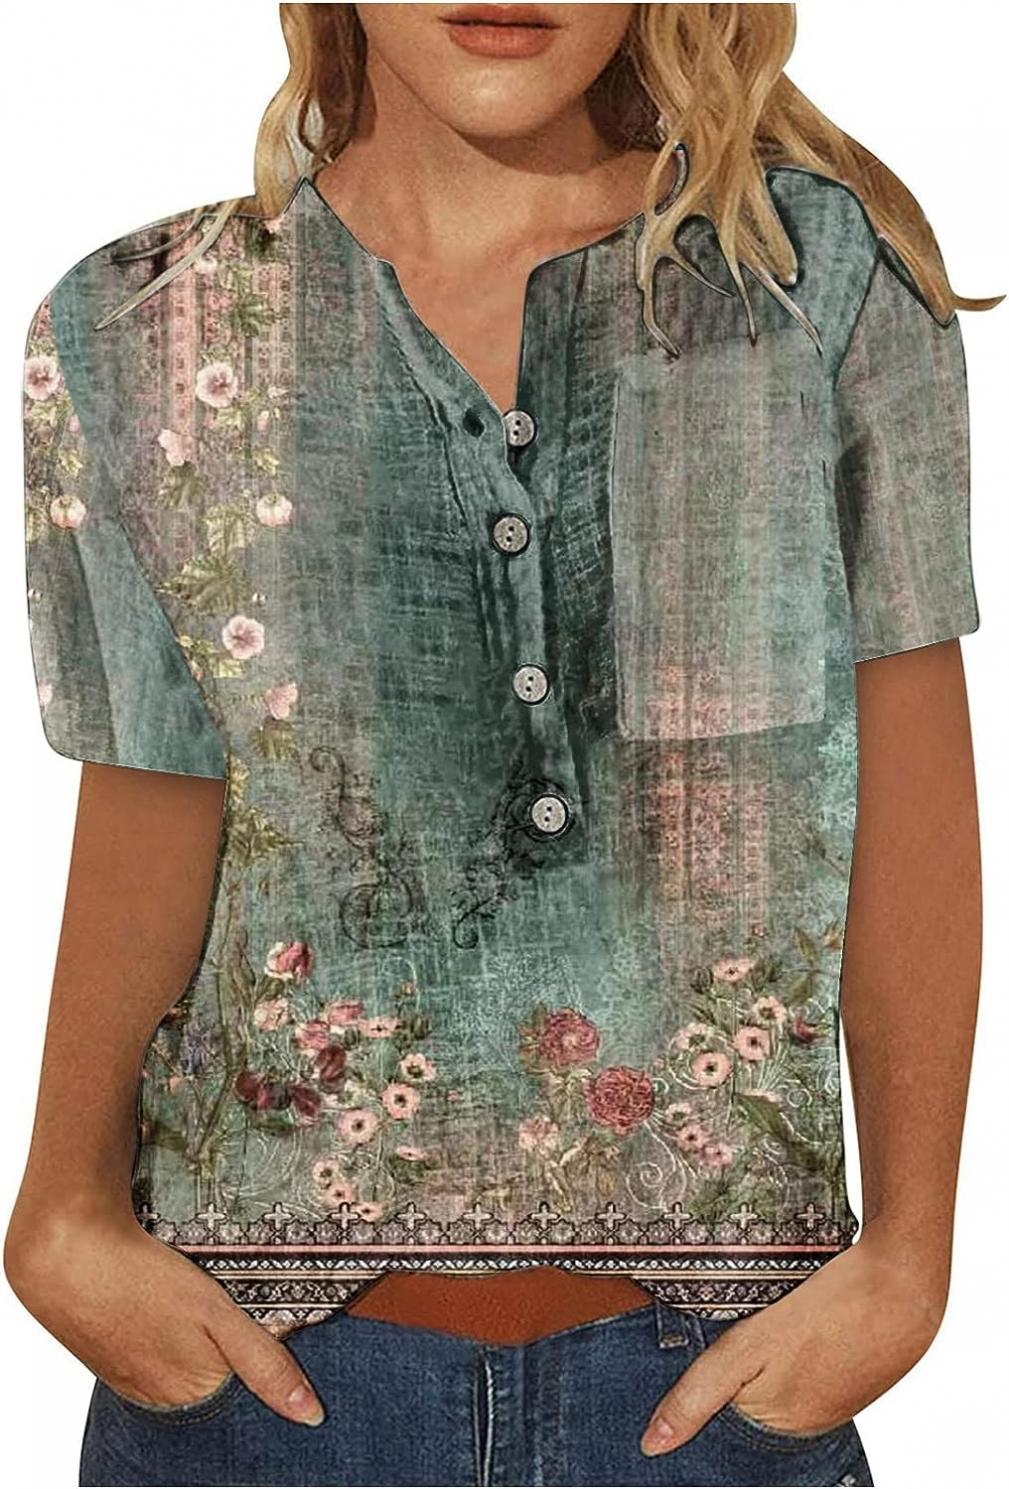 Women's Floral Graphic Print Tee Shirt Button V-Neck Short Sleeve Blouses T Shirts Pocket Casual Comfy Blouse Tops